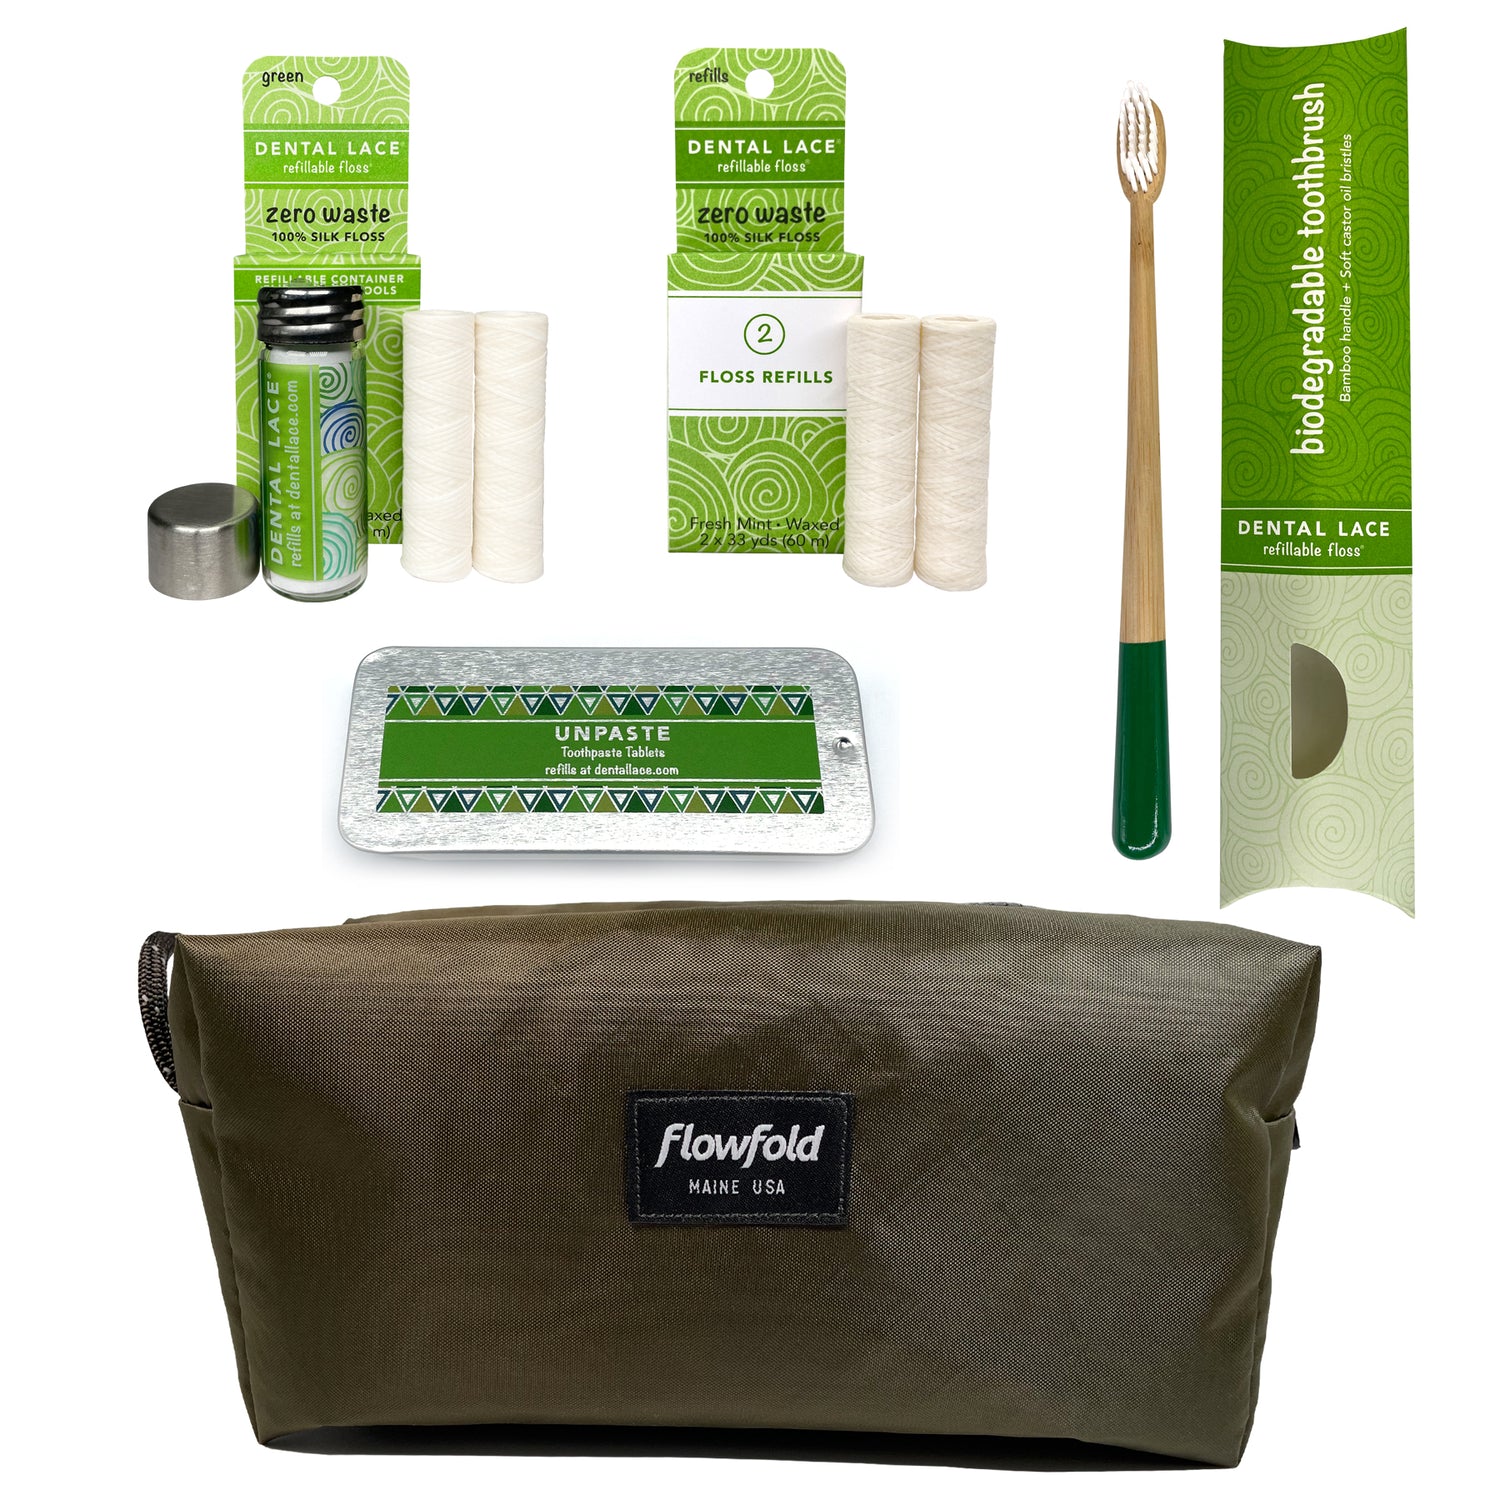 Flowfold Dopp Bag with Dental Lace Products